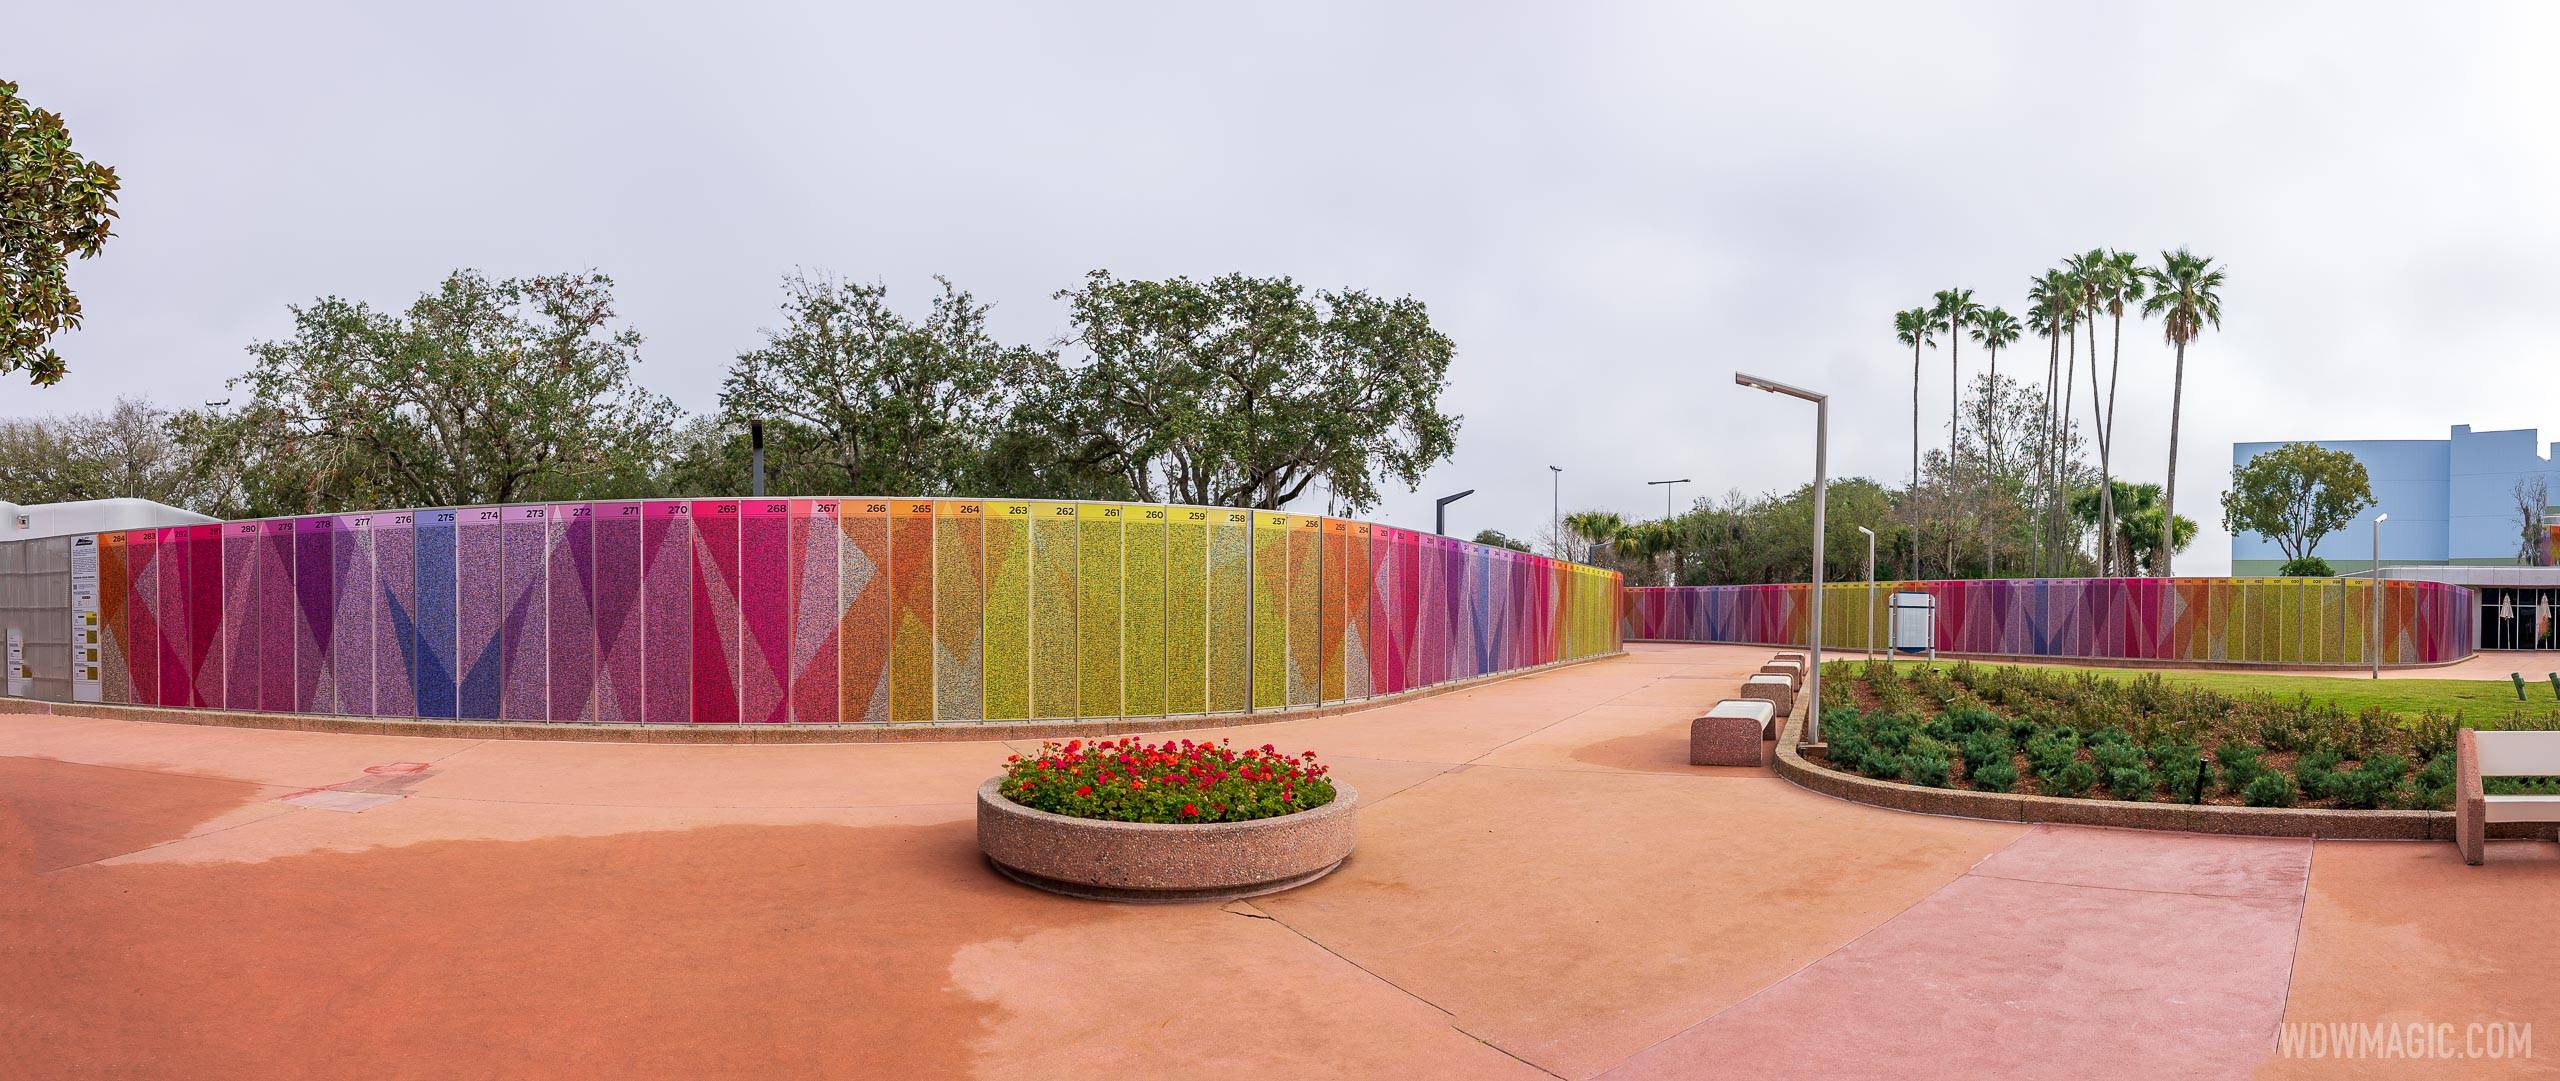 PHOTOS - More Leave a Legacy walls now on display at EPCOT